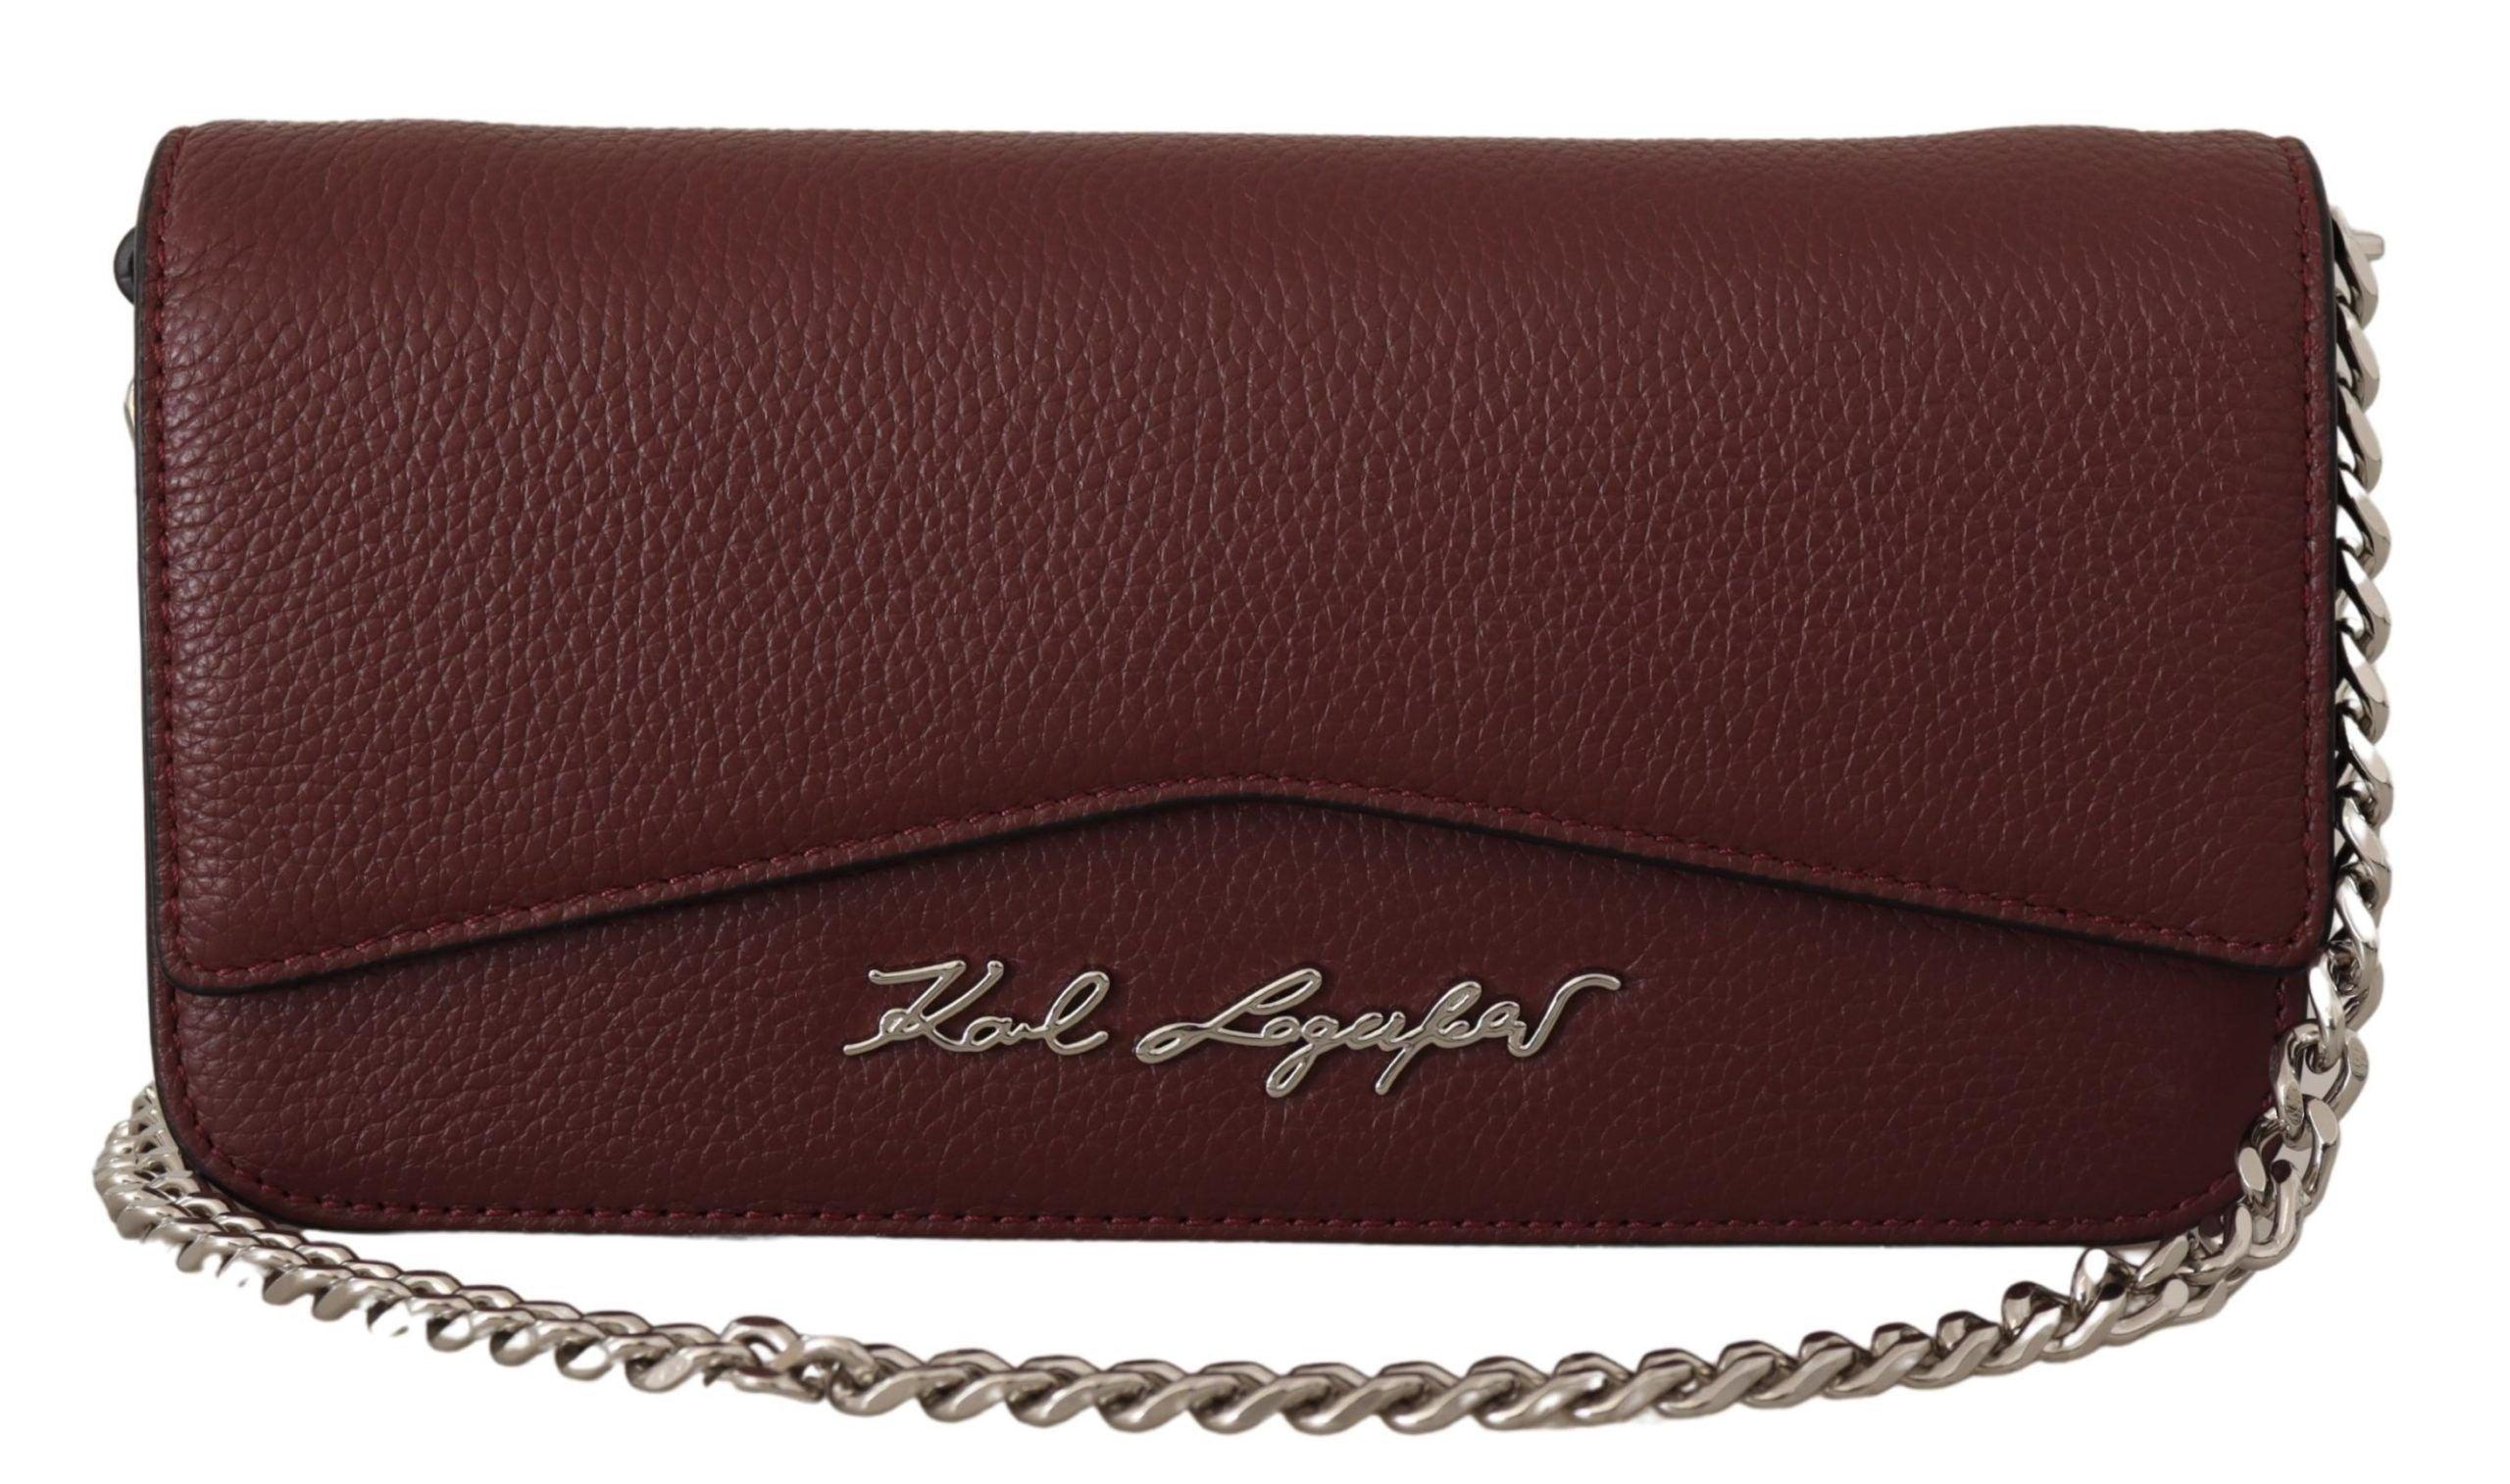 Karl Lagerfeld Wine Leather Evening Clutch Bag in Brown | Lyst